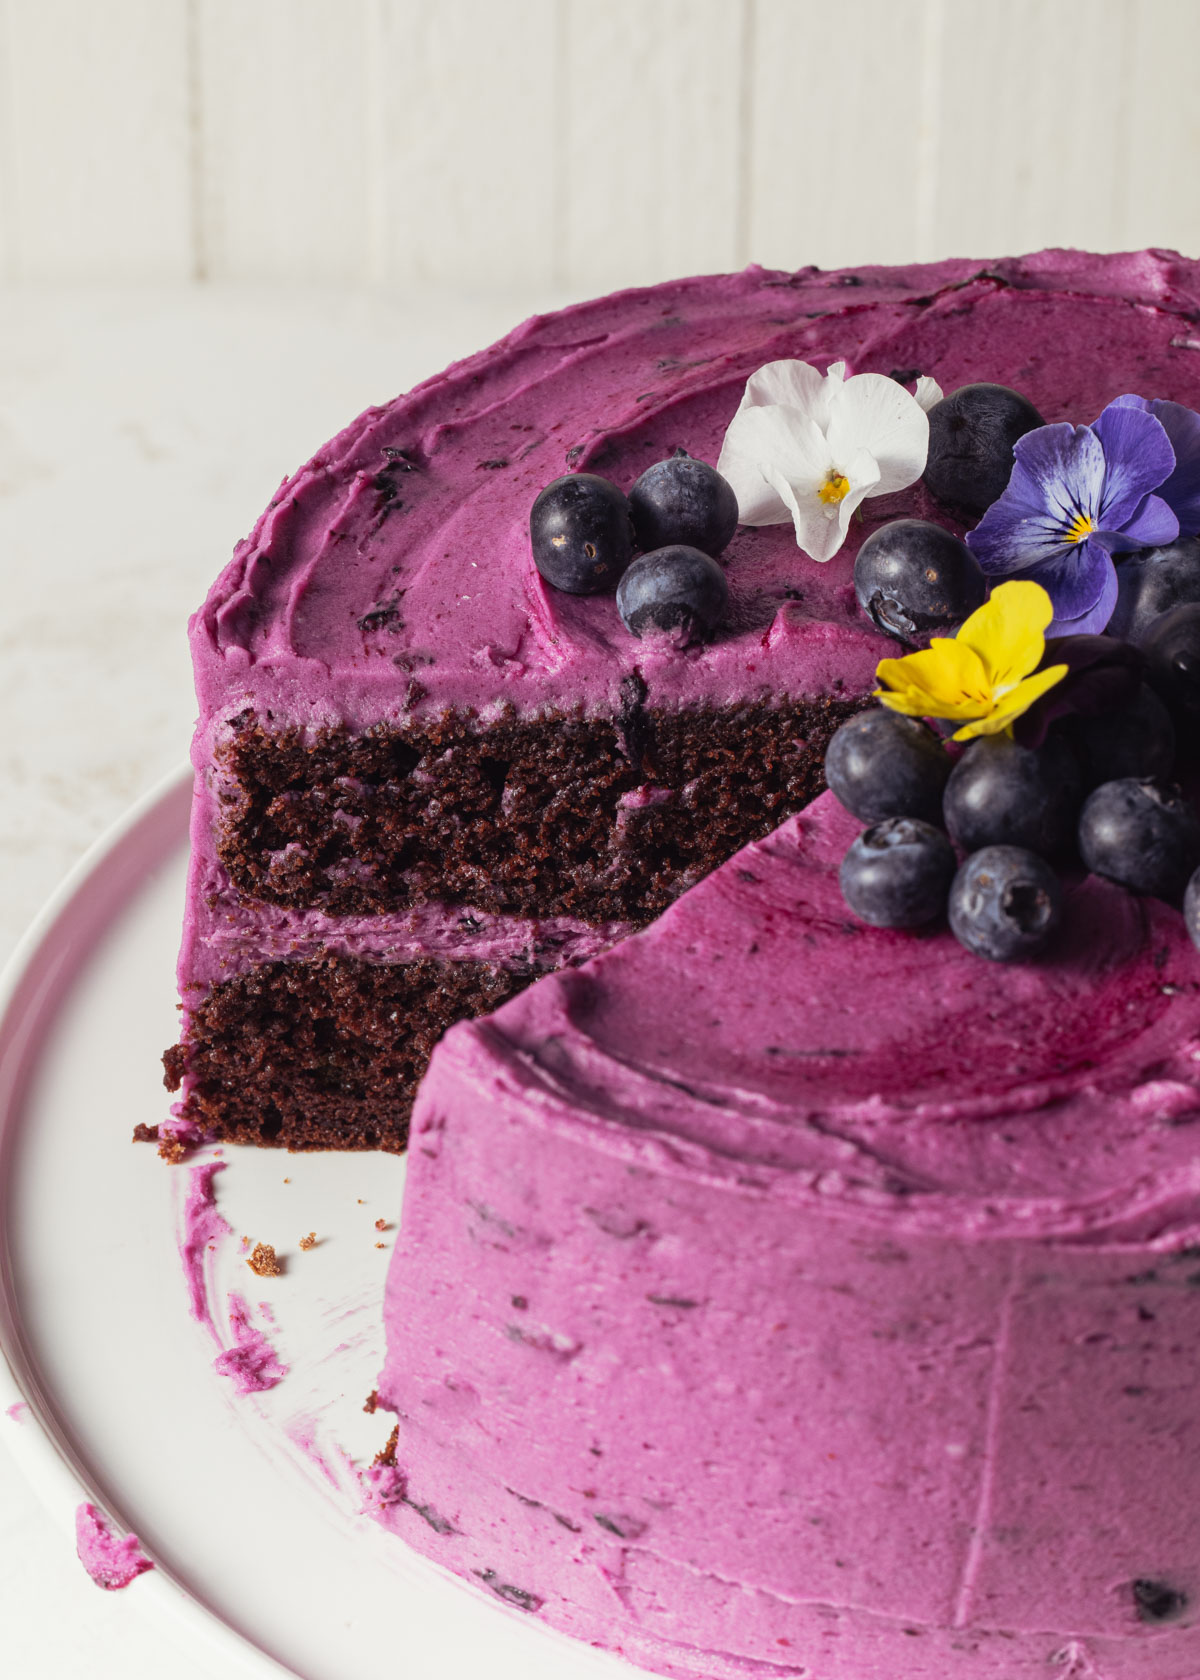 A close-up of a moist chocolate layer cake with blueberry frosting